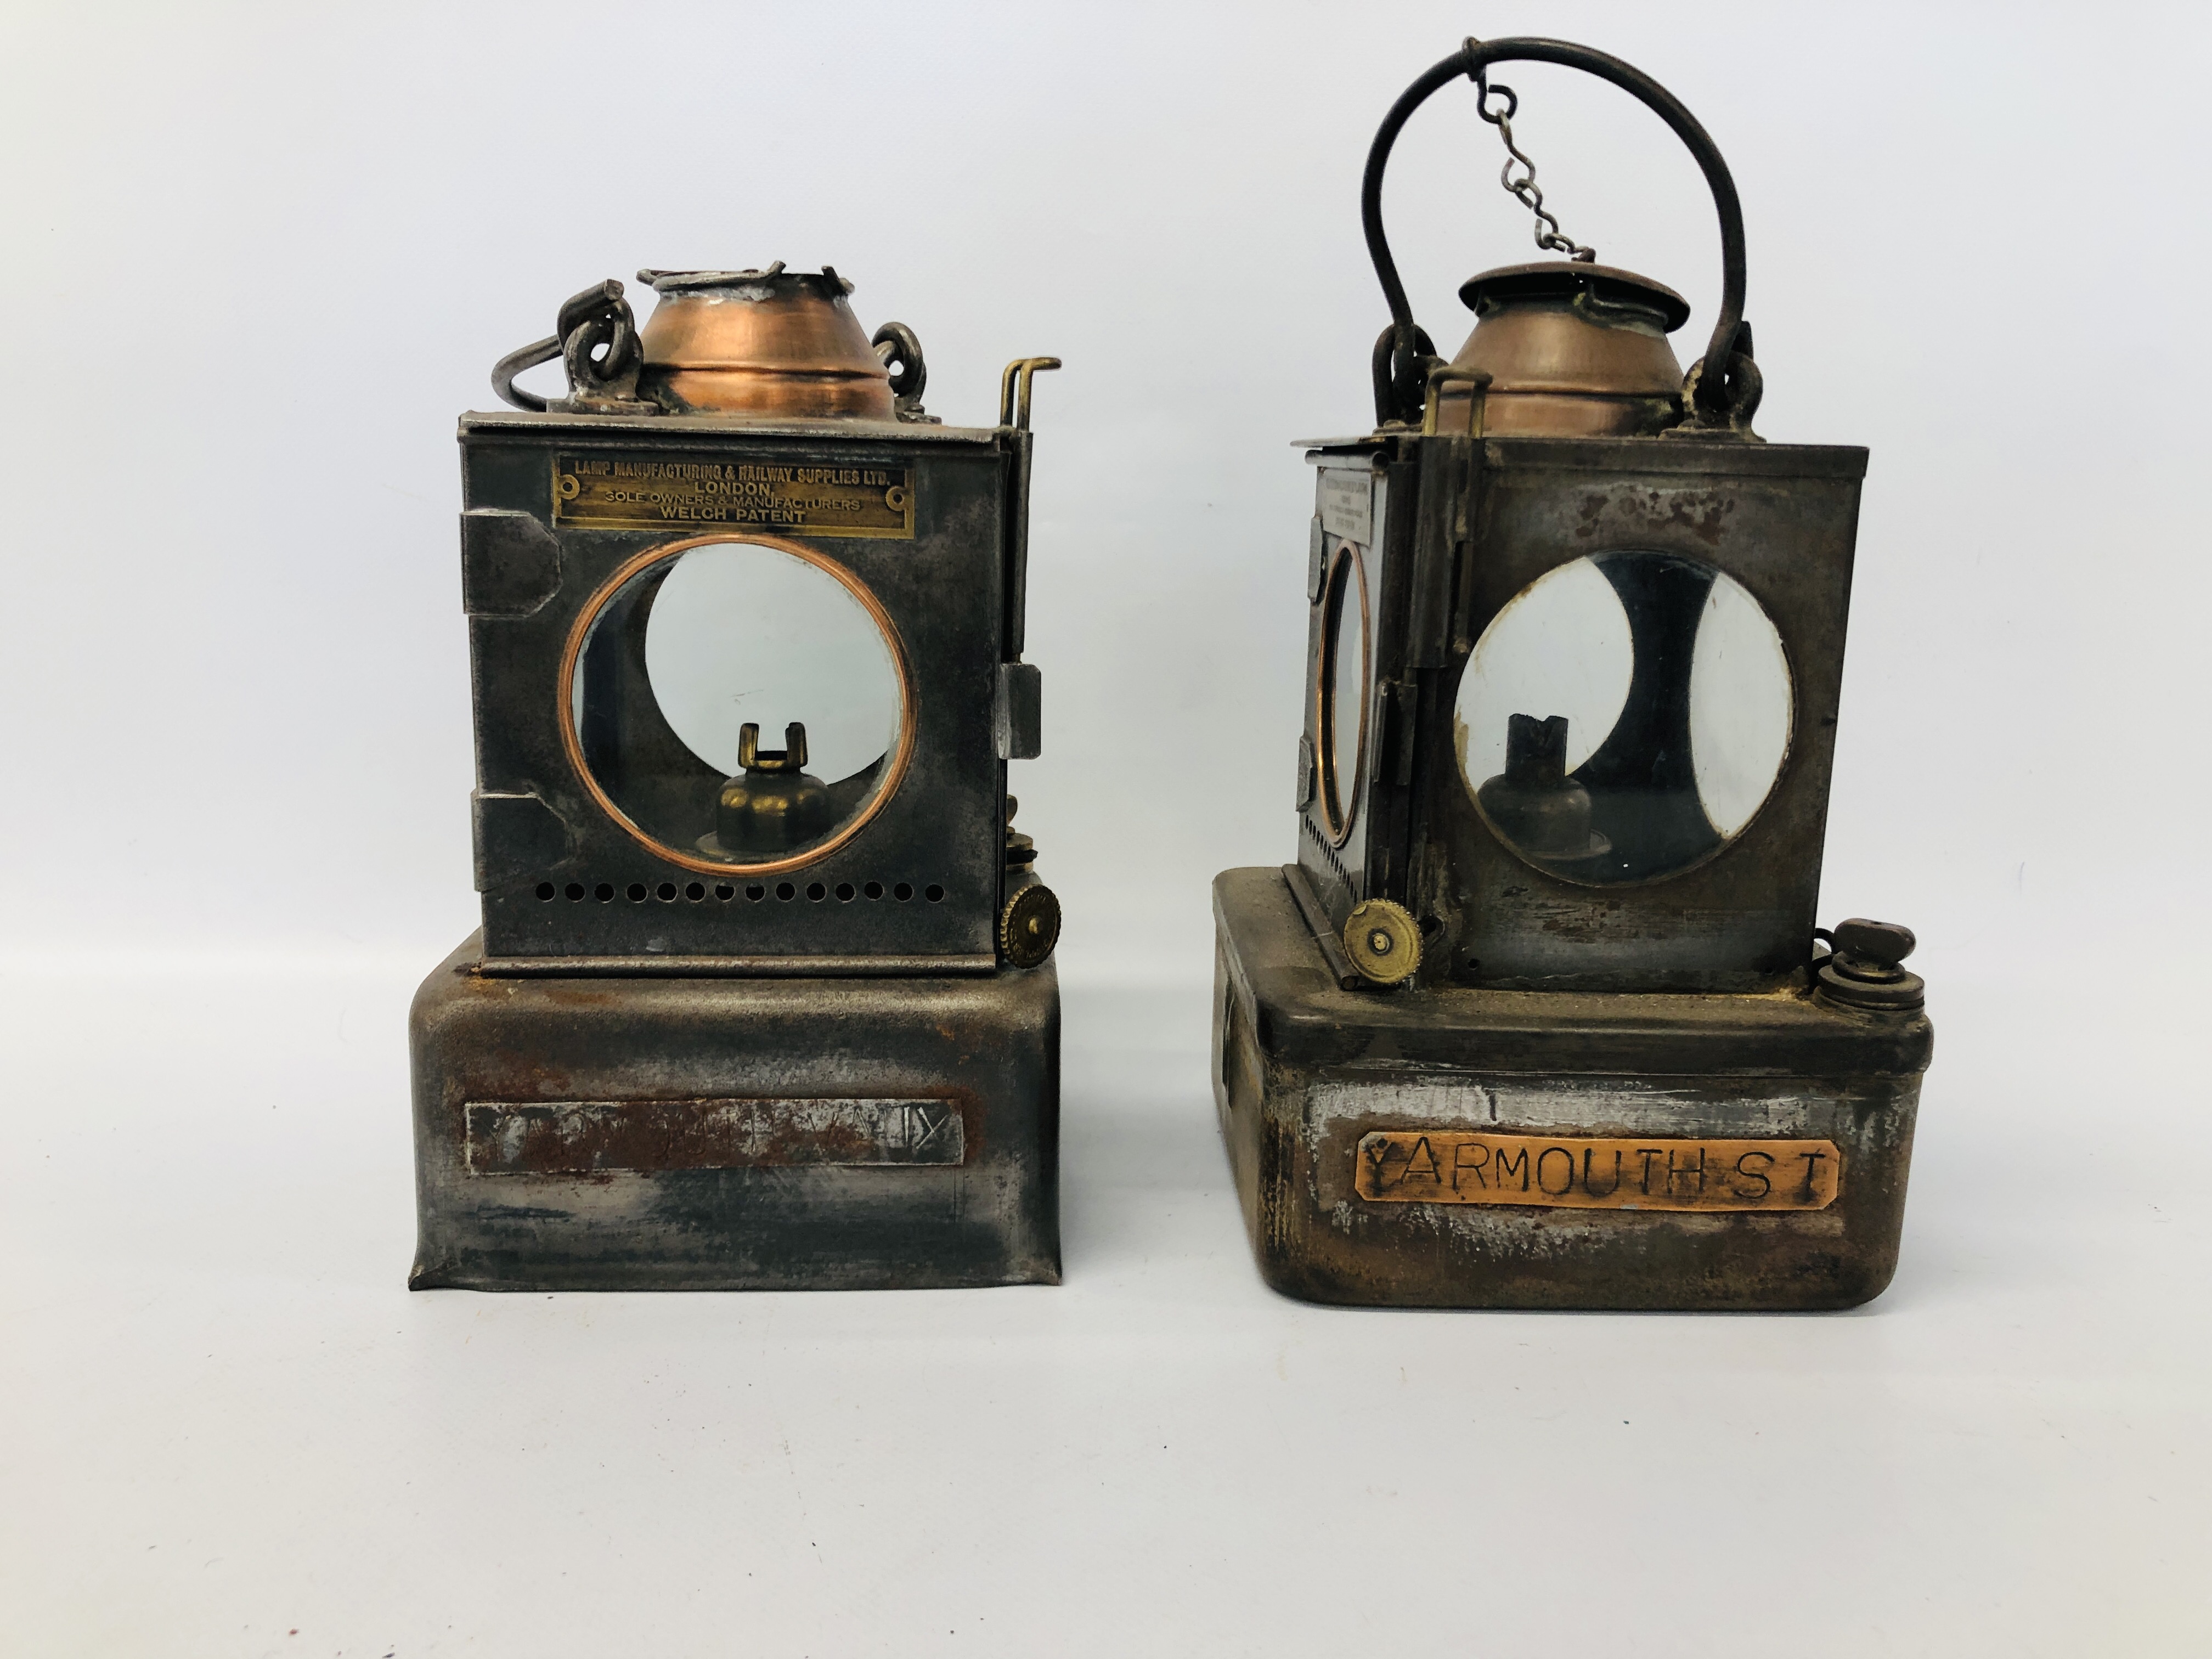 2 X VINTAGE RAILWAY LAMPS "WELCH PATENT" YARMOUTH VAUX & YARMOUTH ST